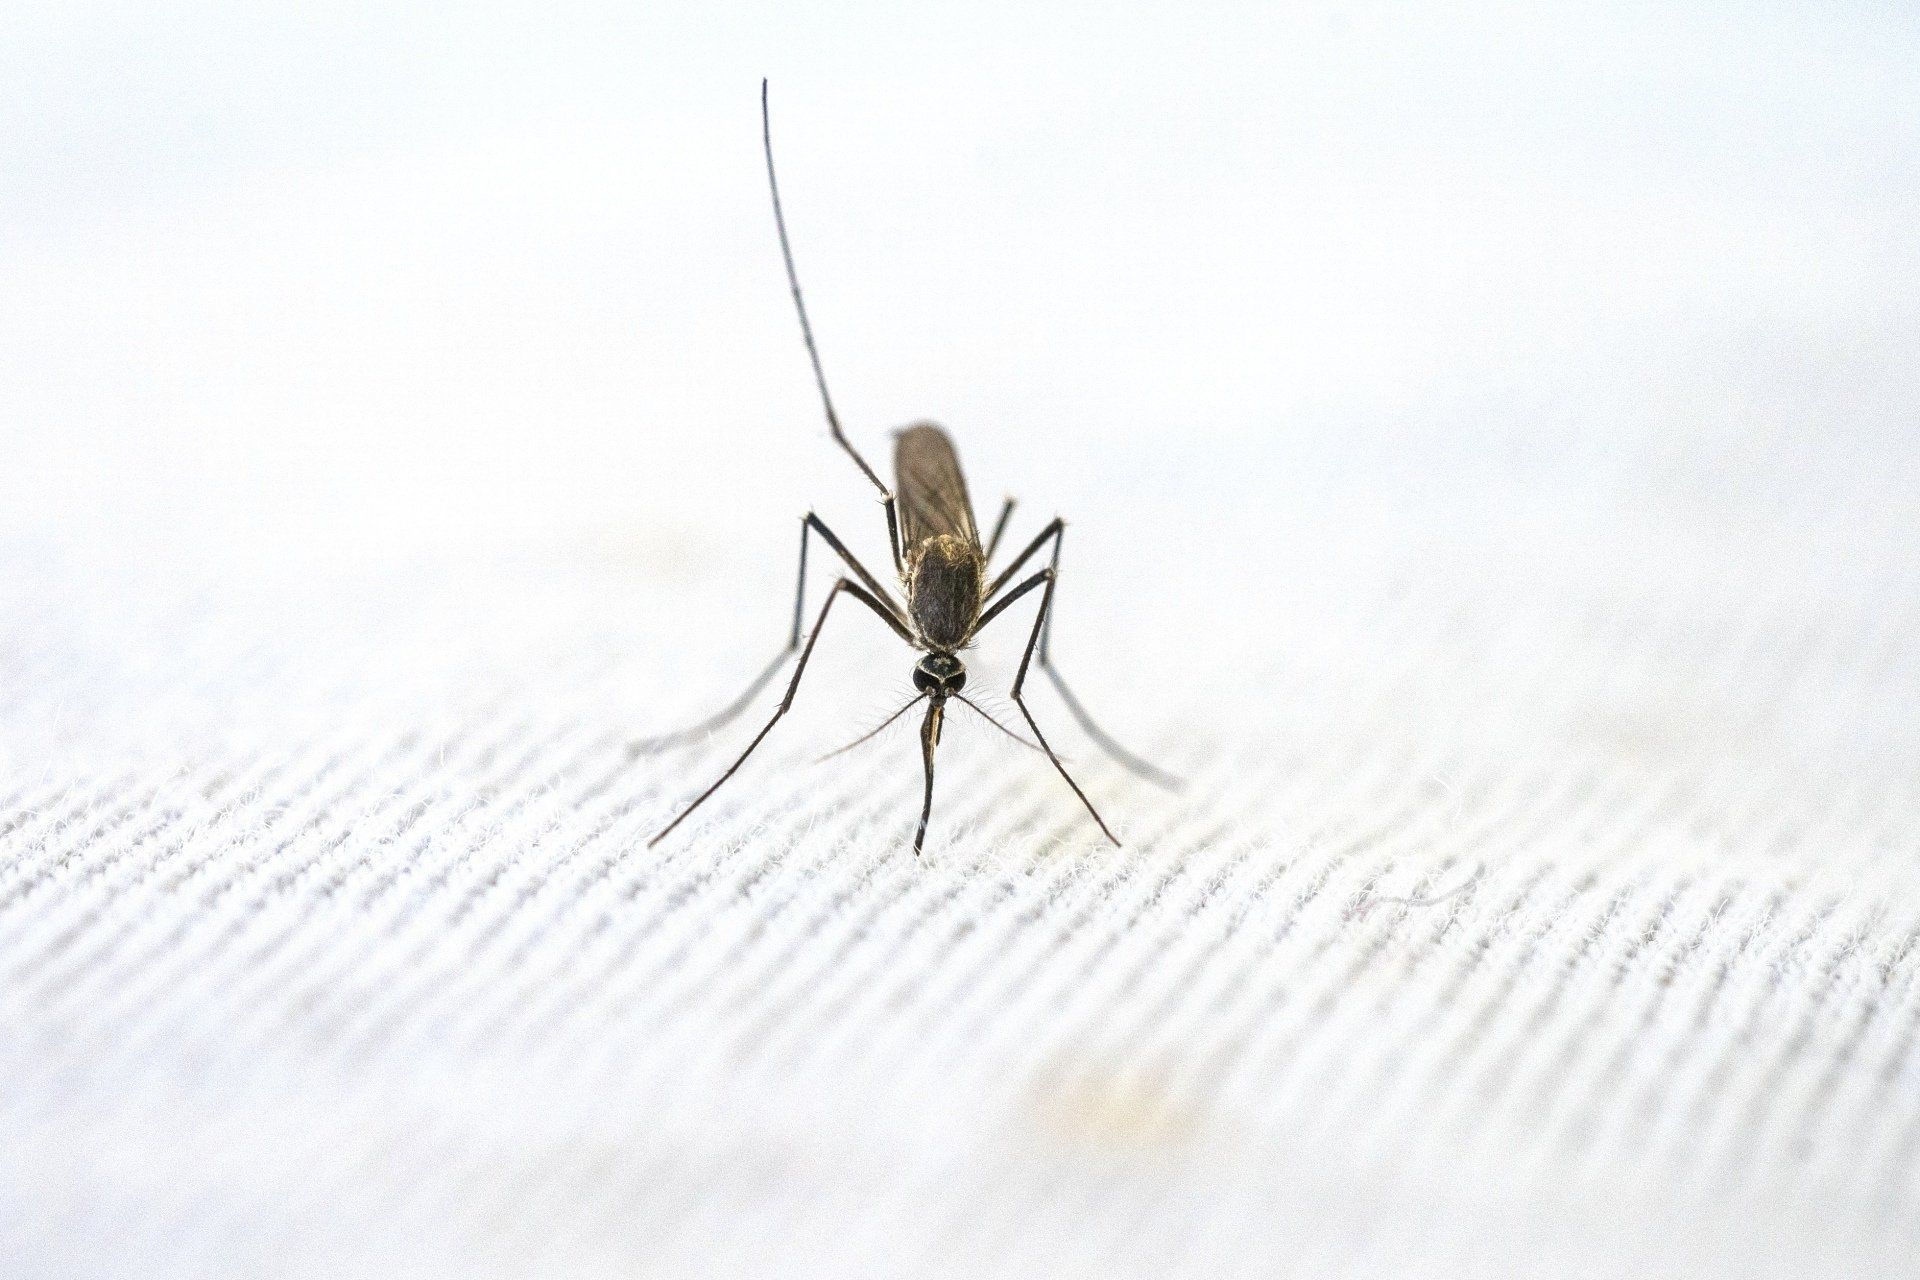 A close up of a mosquito on a white surface.